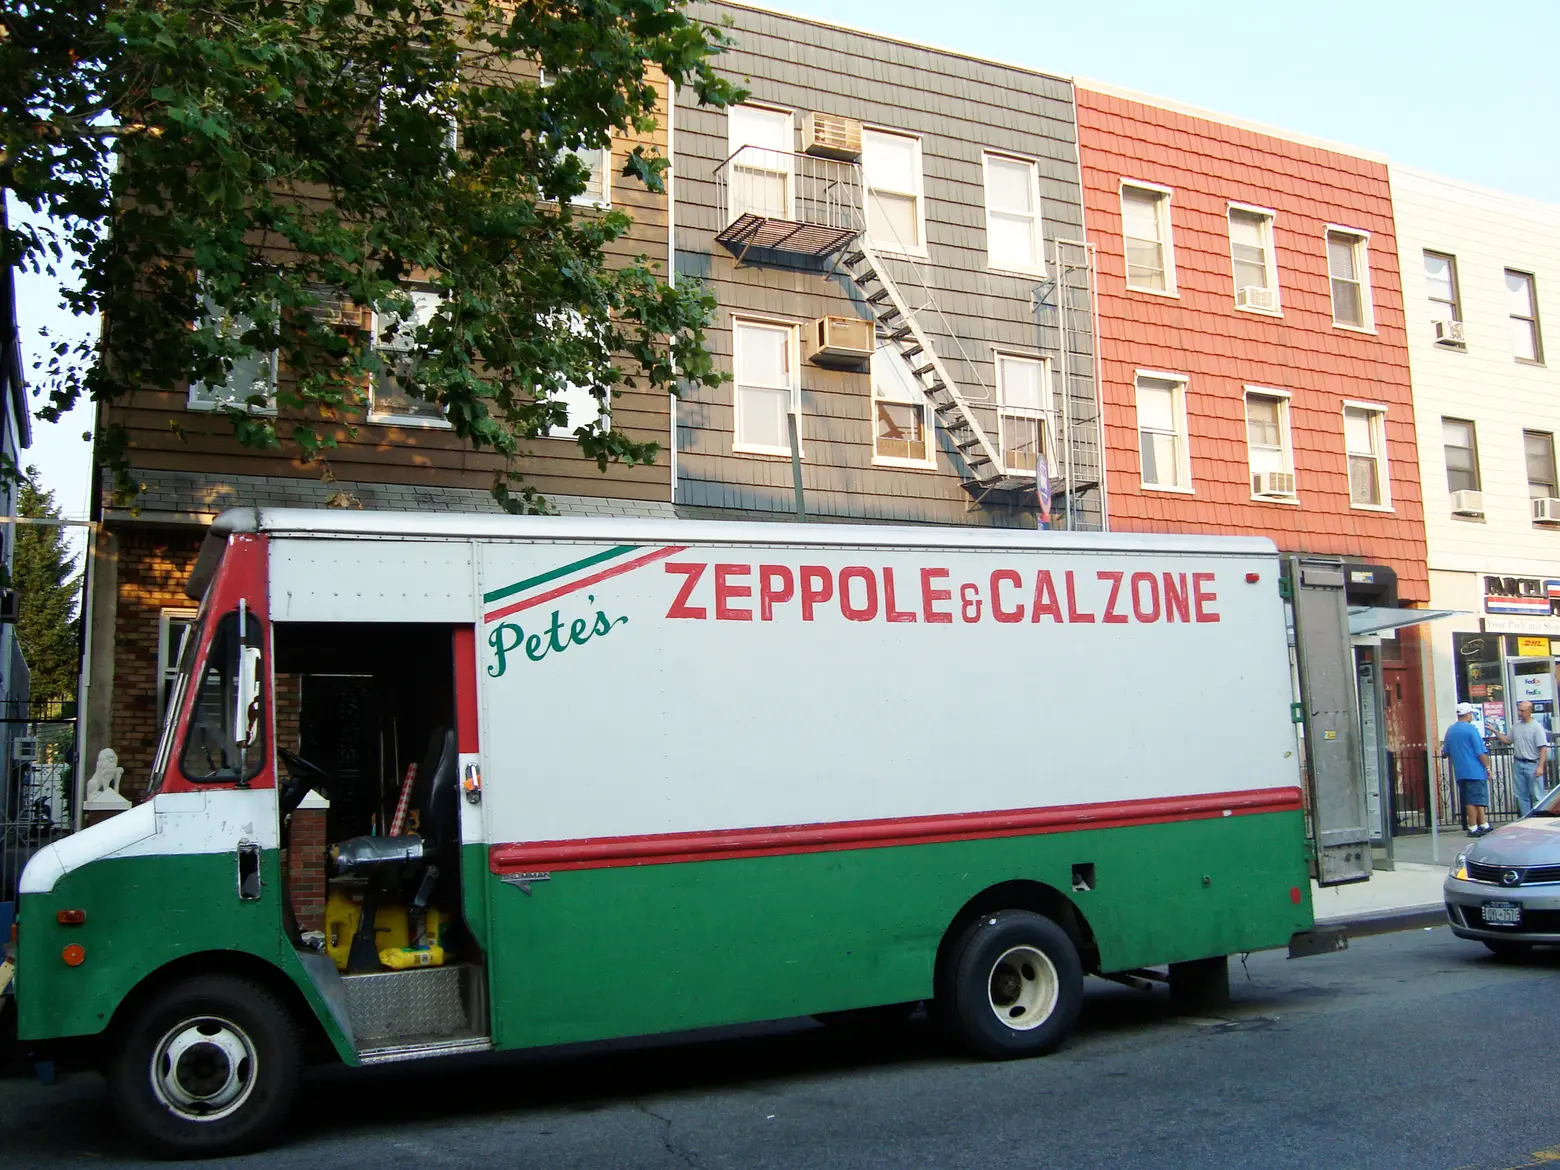 The Italian side of Williamsburg: History, famous joints, and today’s culture